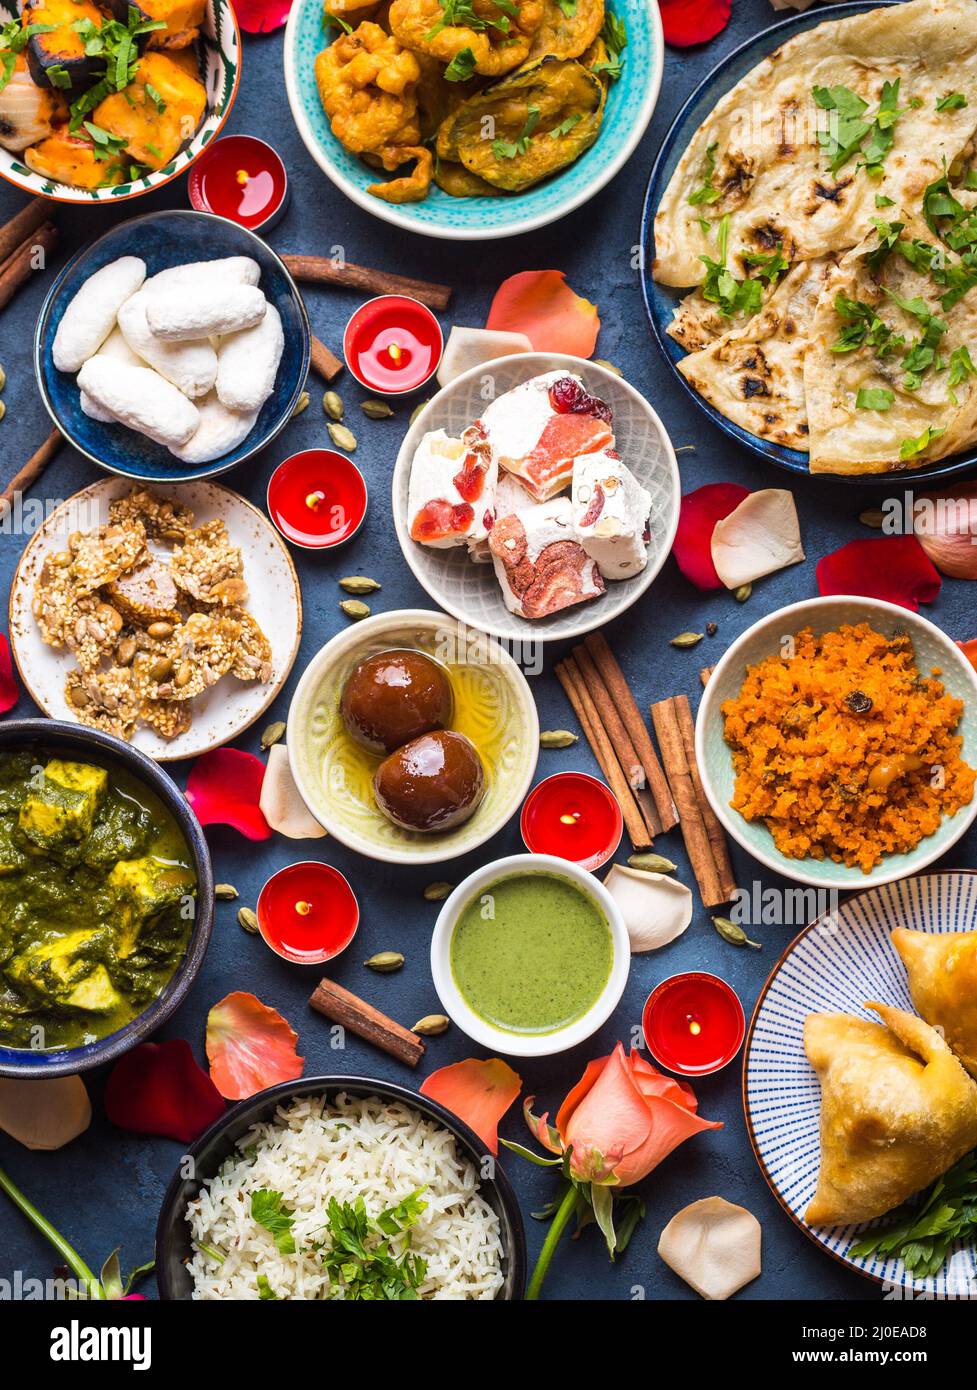 Food for Indian festival Diwali Stock Photo